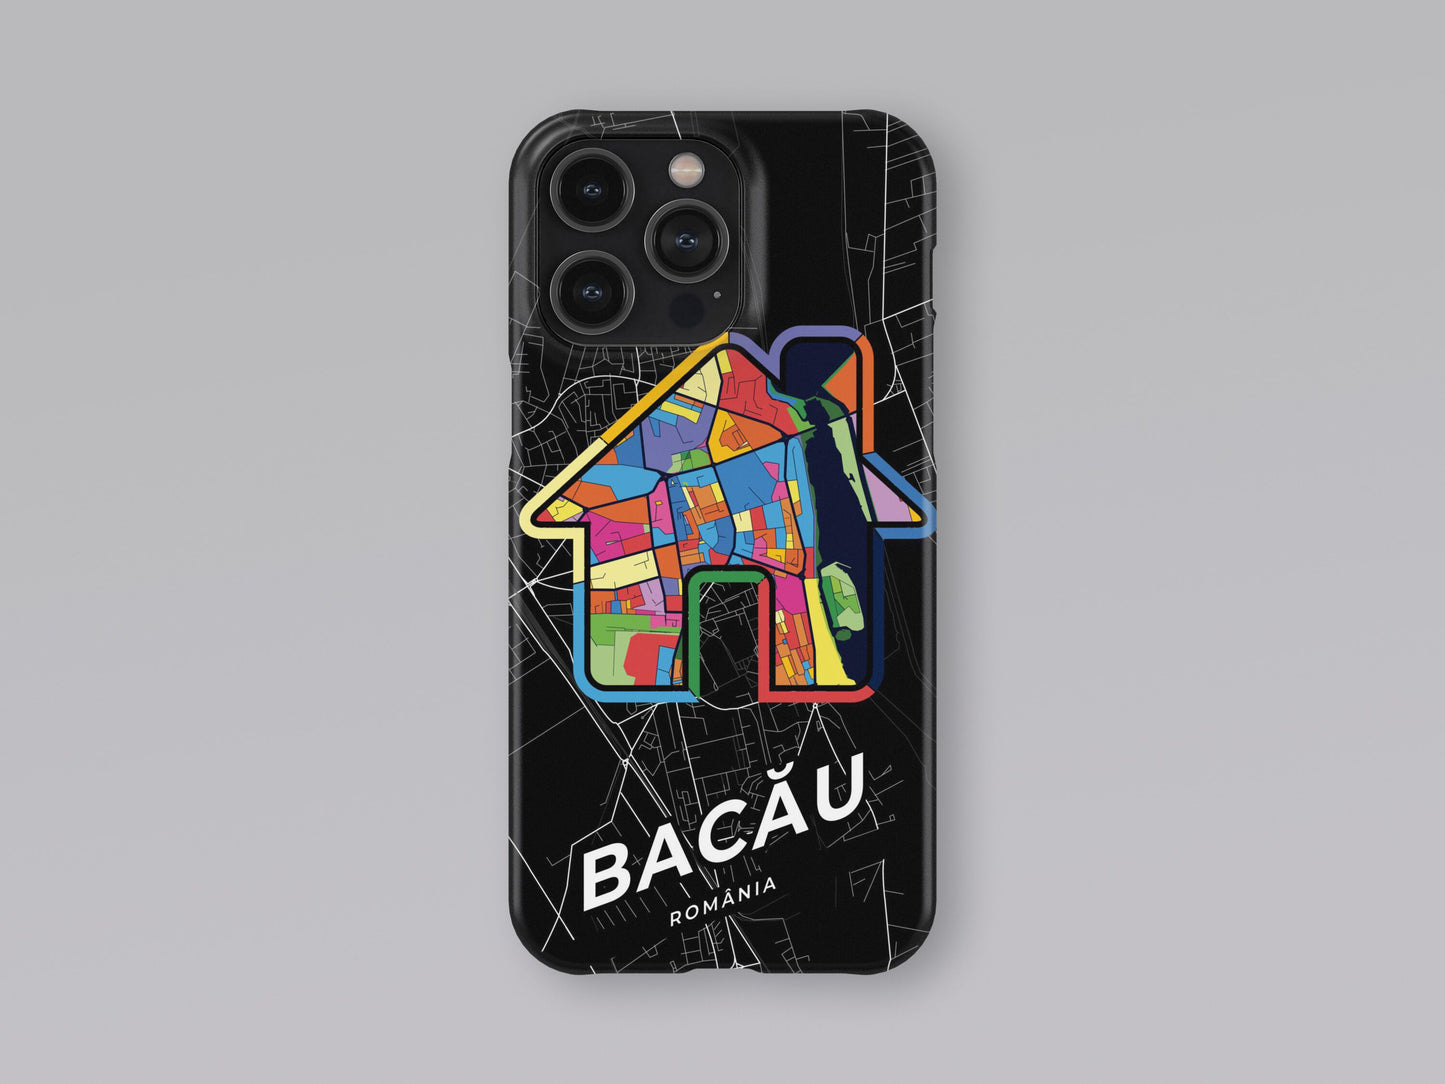 Bacău Romania slim phone case with colorful icon. Birthday, wedding or housewarming gift. Couple match cases. 3